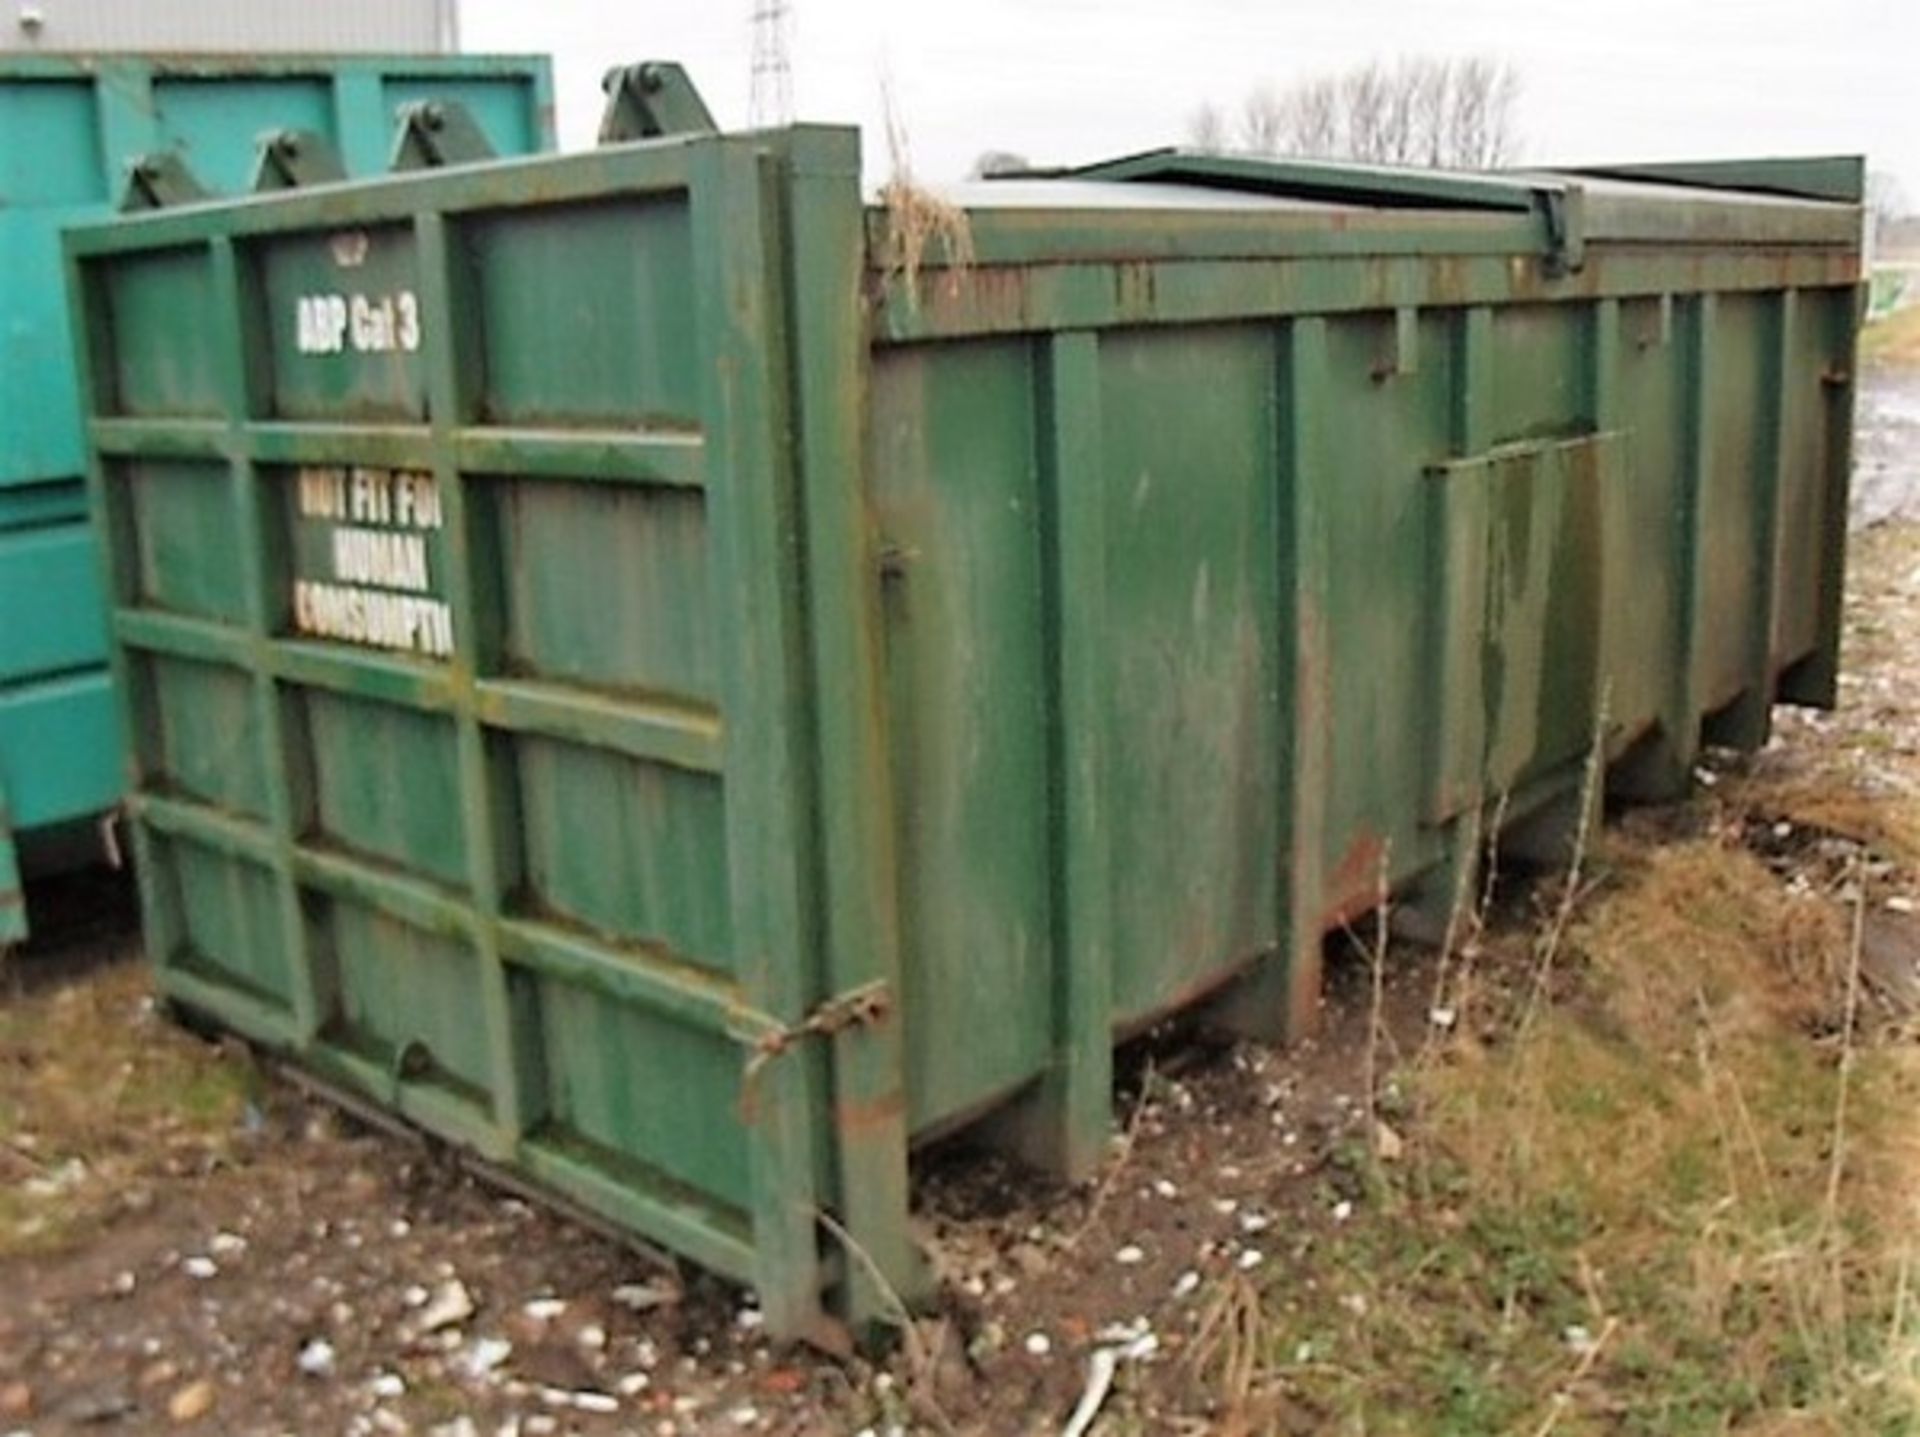 FOOD WASTE SKIP C/W ENCLOSED TOP. MANUFACTURED BY C F BOOTH. SOLD FROM ERROL AUCTION SITE. VIEWING A - Image 3 of 4